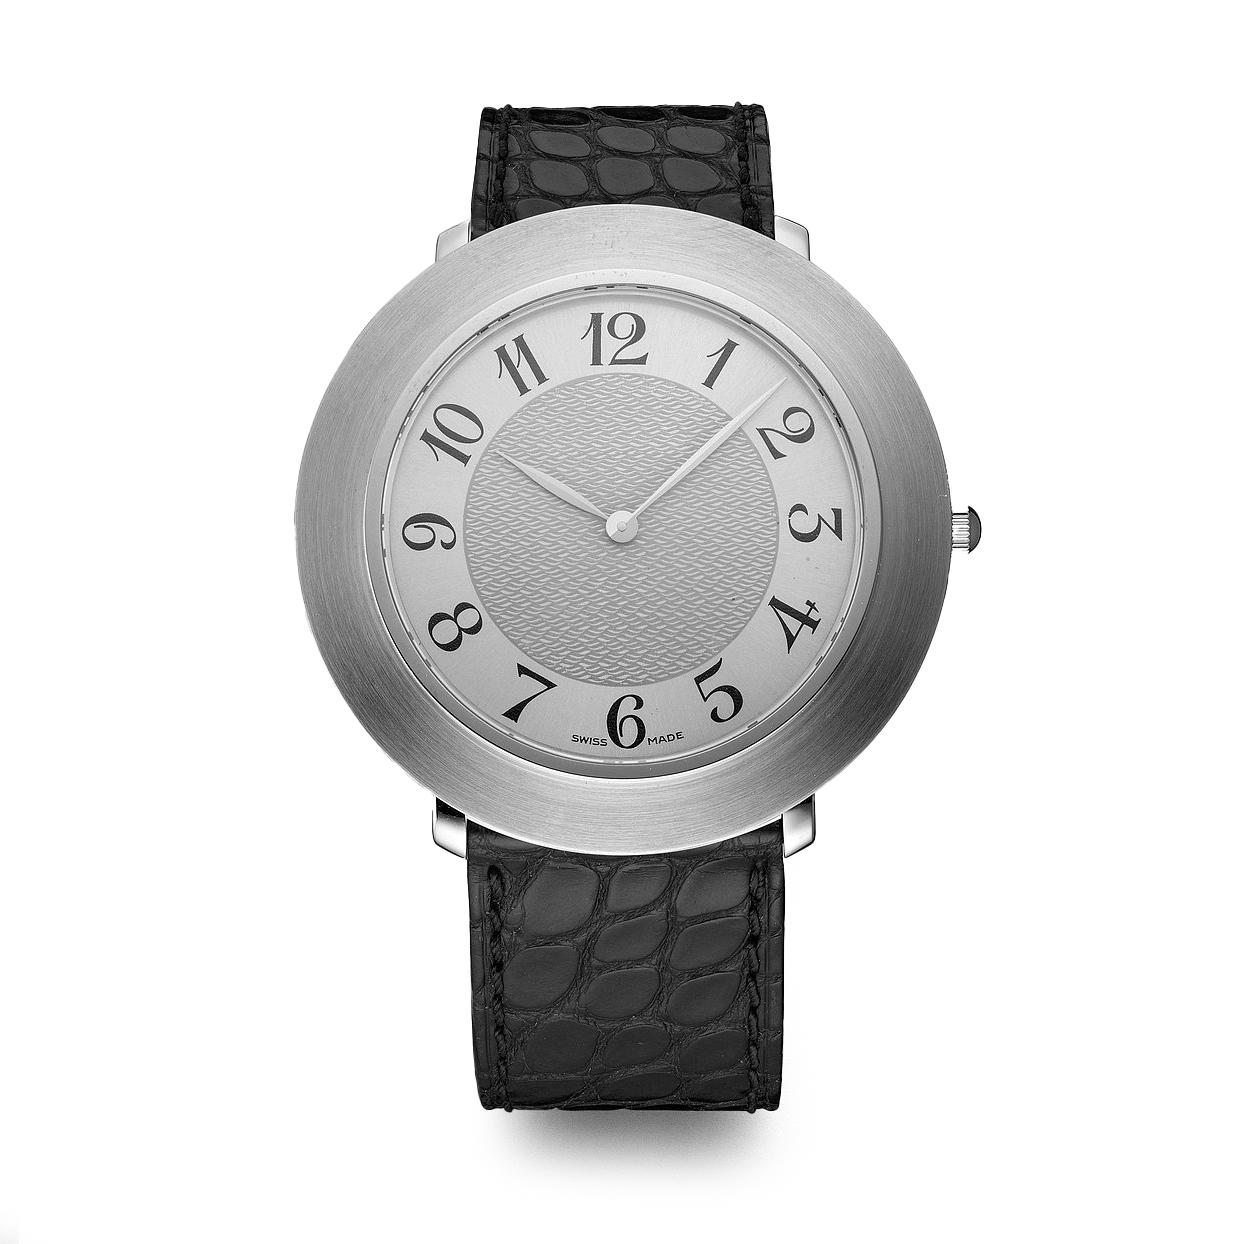 Watch in steel, silver dial with prong buckle alligator strap quartz movement.

We do not guarantee the functioning of this watch.